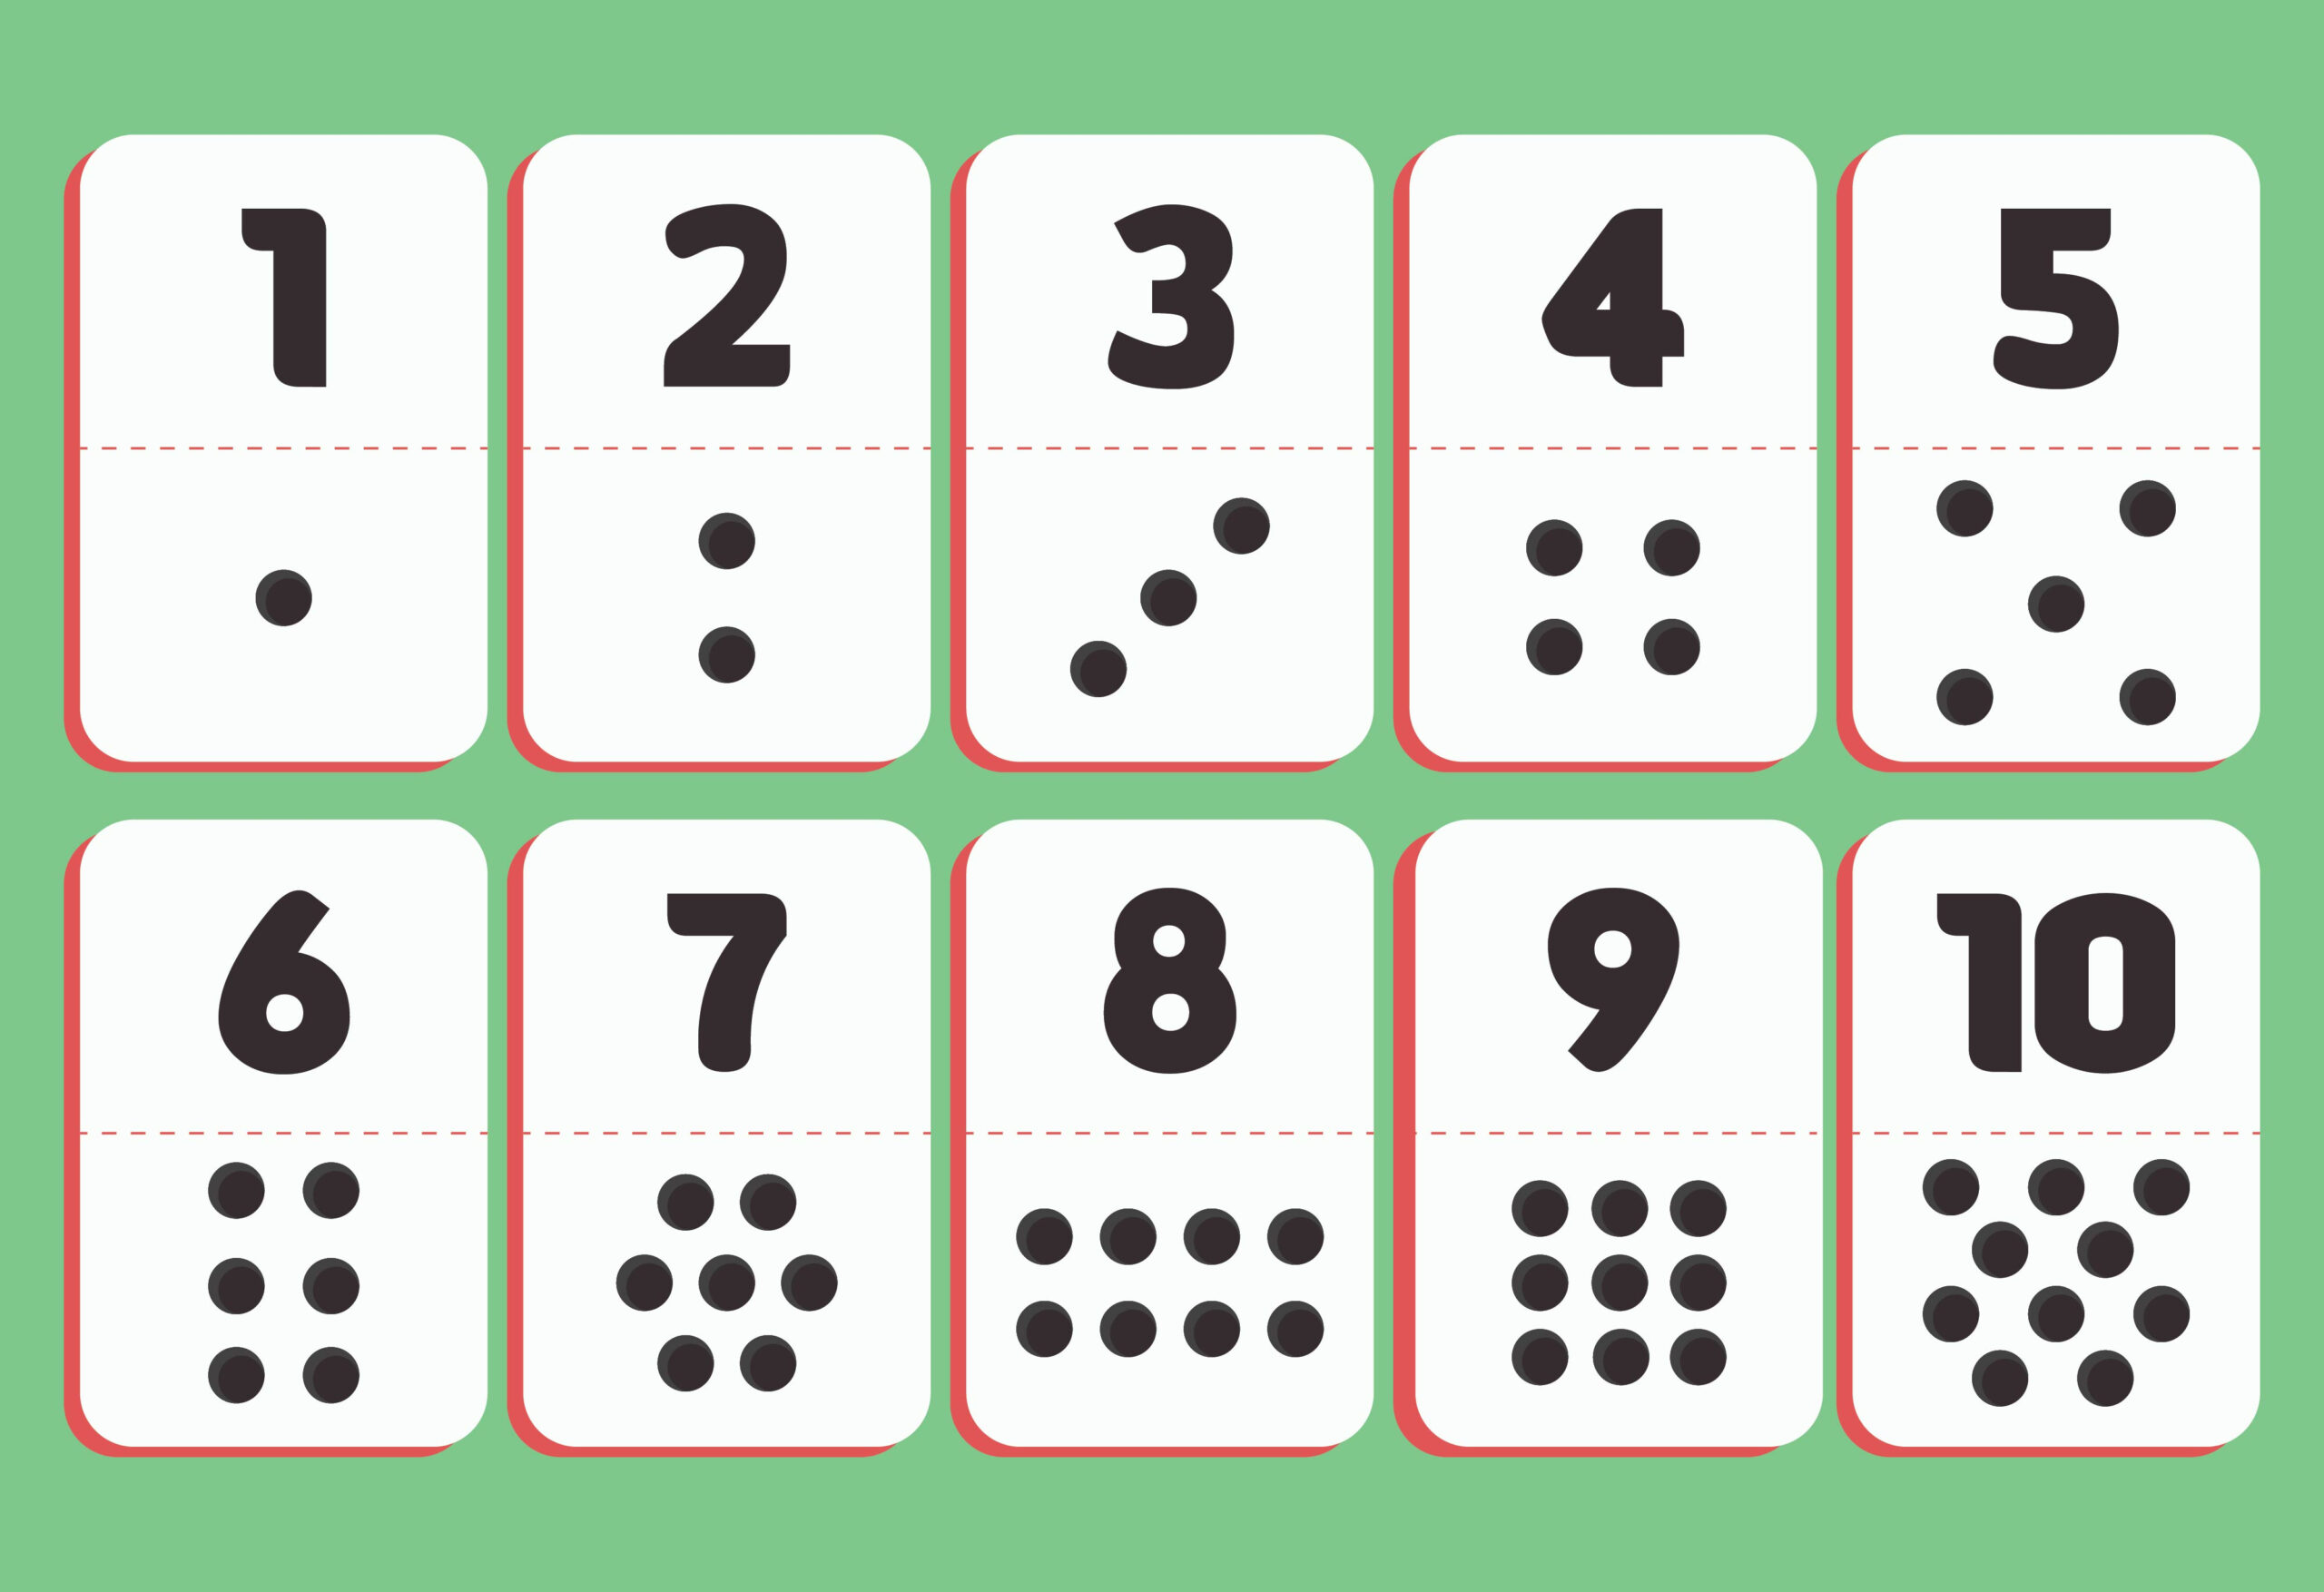 Free Printable Number Cards 1 10 With Dots